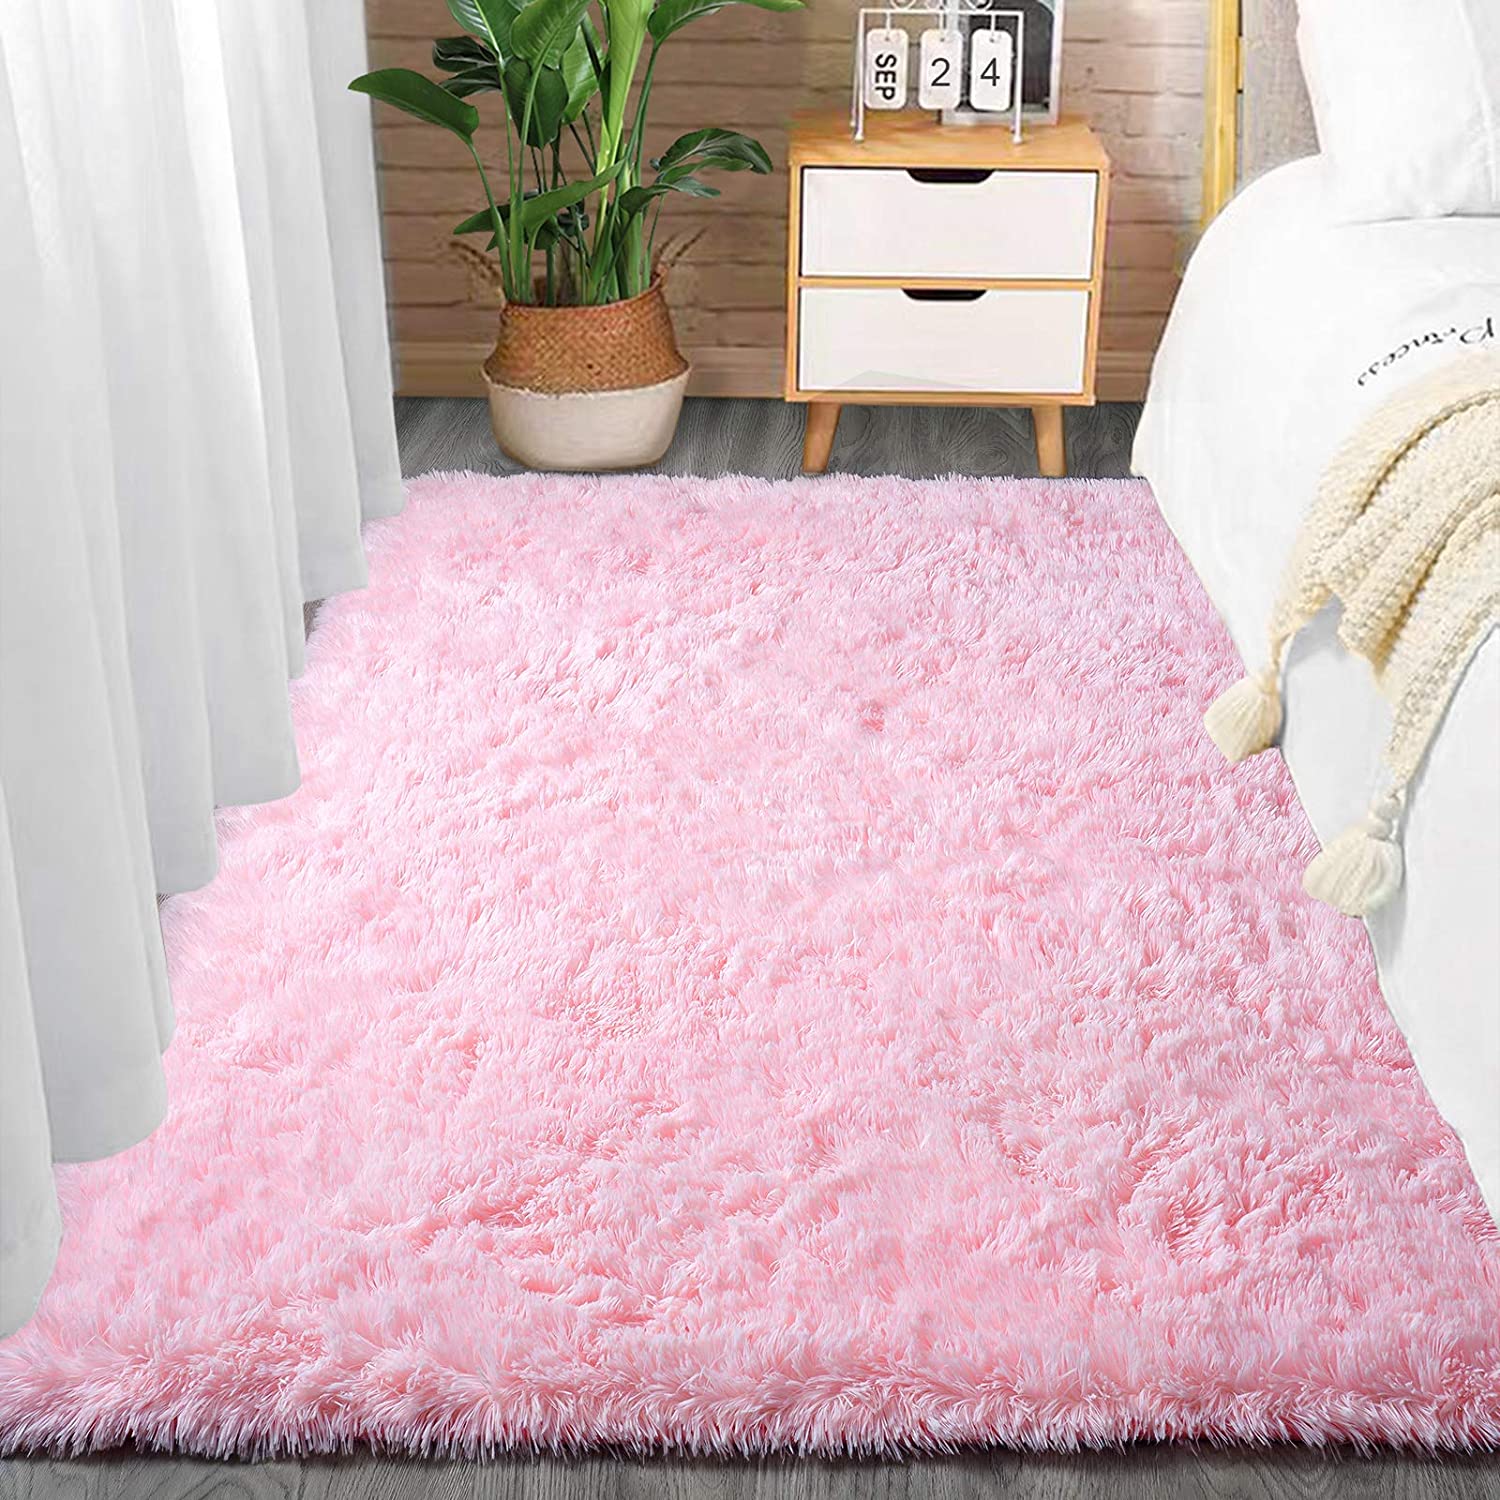 Pink Rug – A special addition to your bedroom